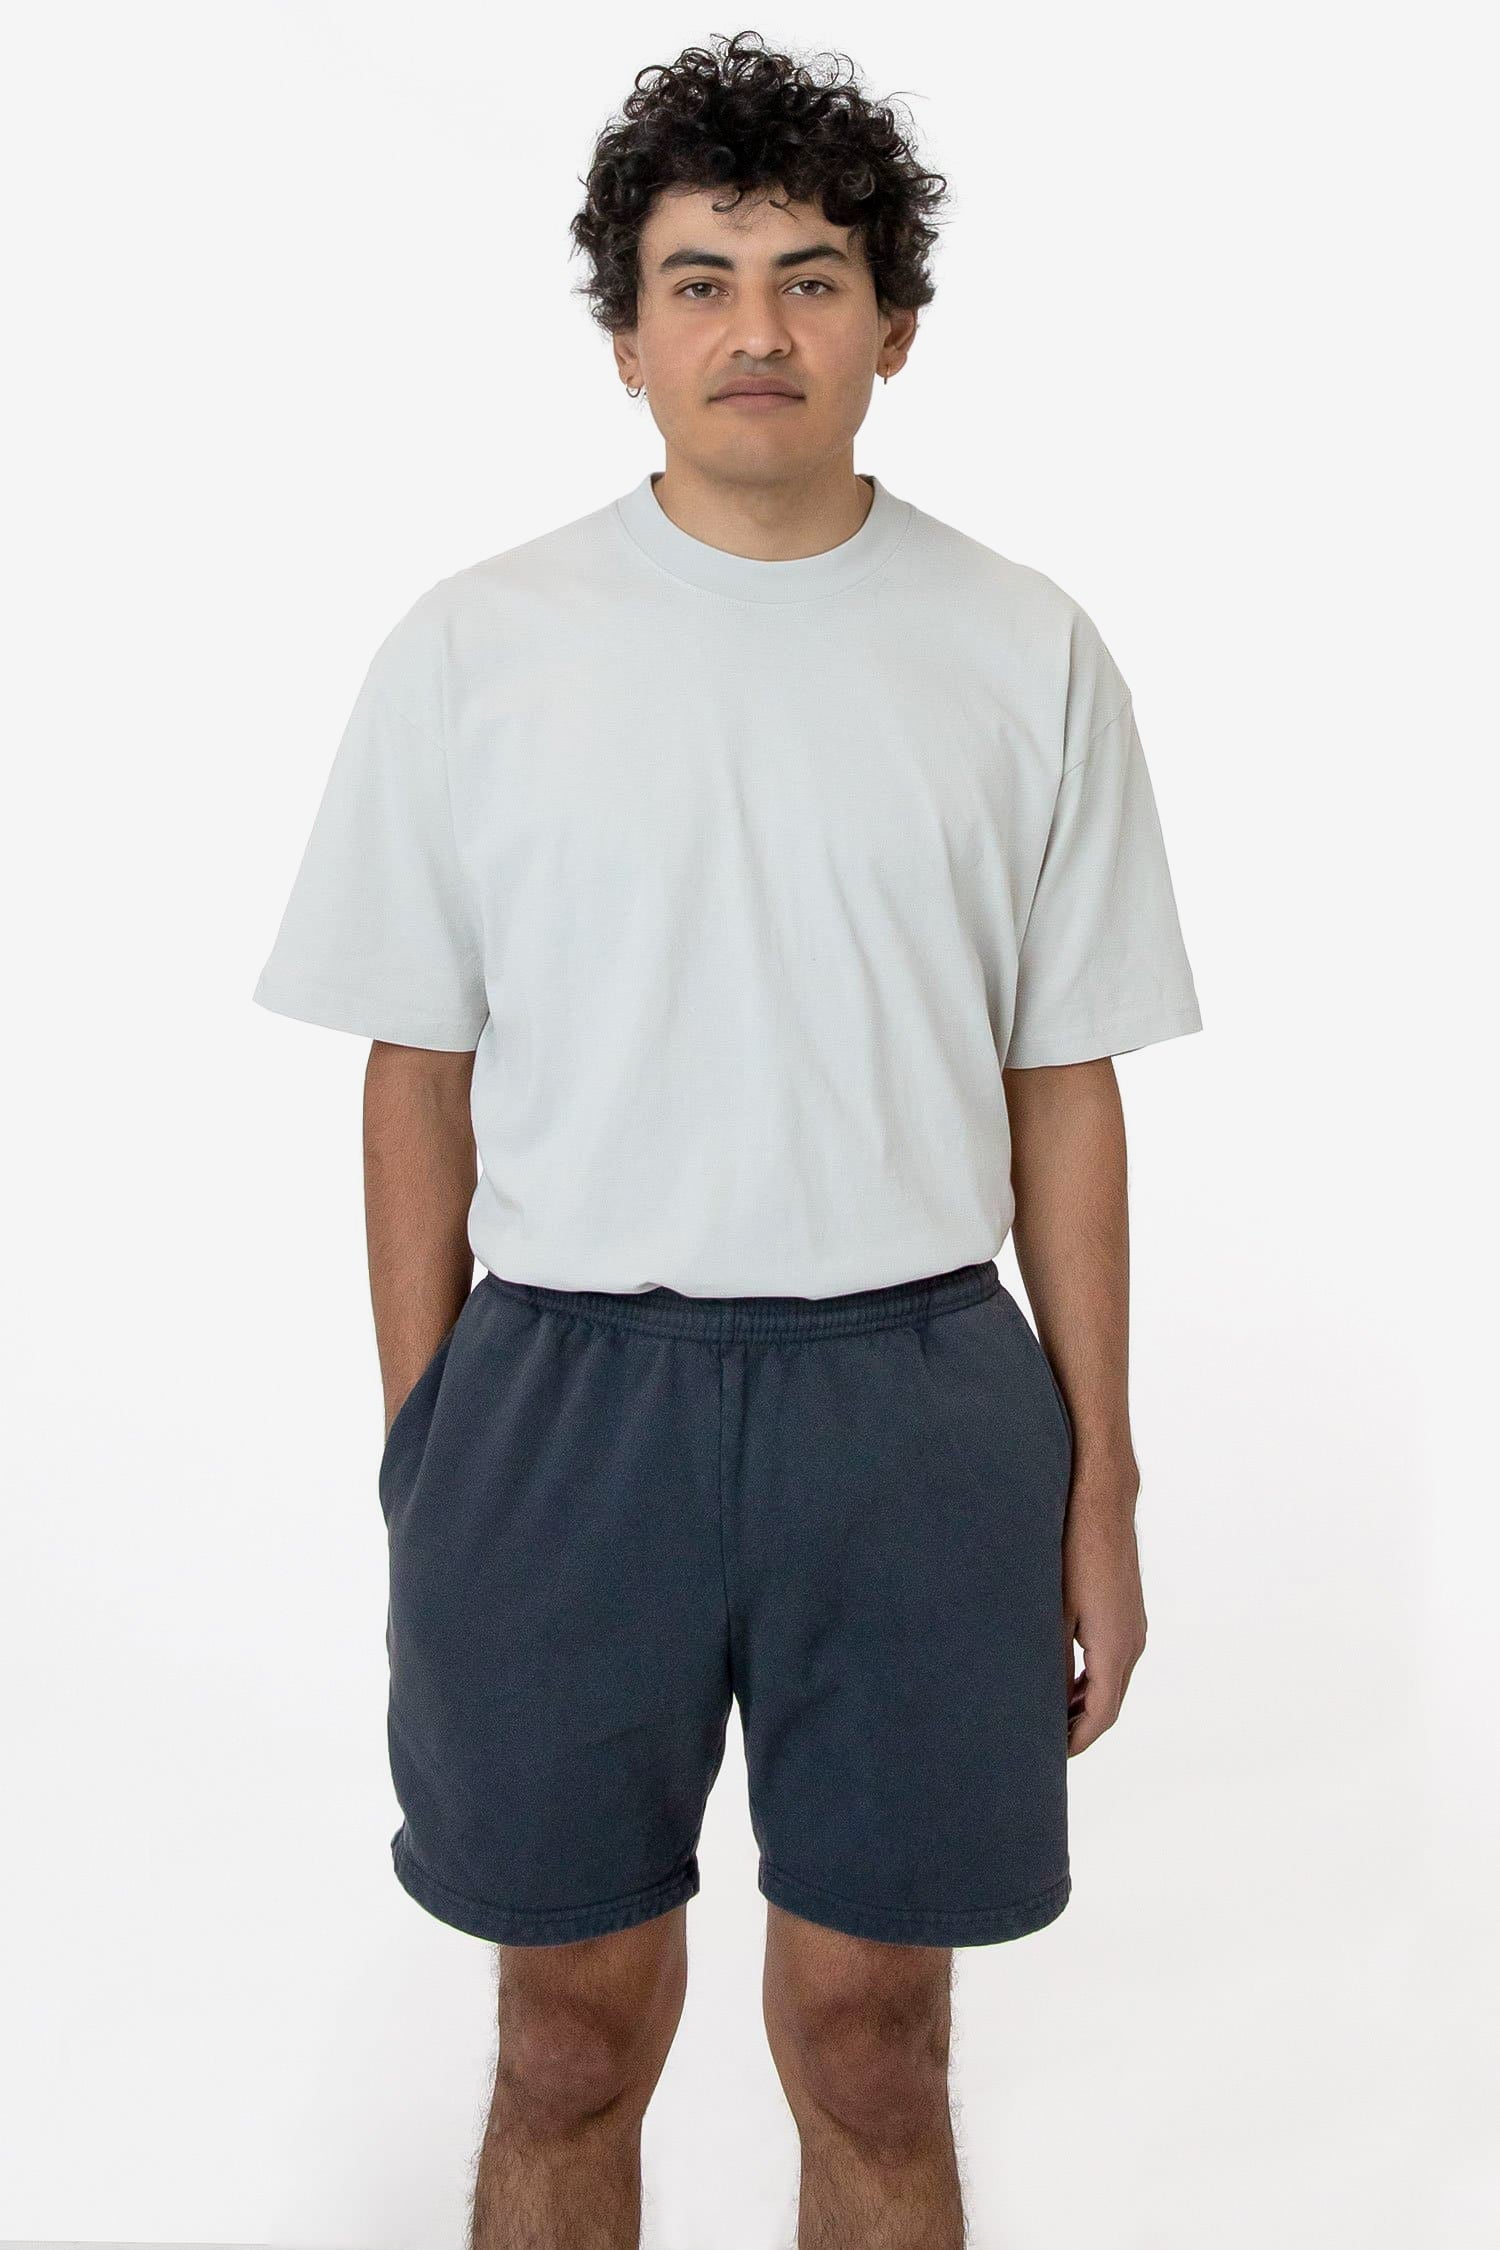 Los Angeles Apparel | Length Short for Men in Dolphin Blue, Size 2XL